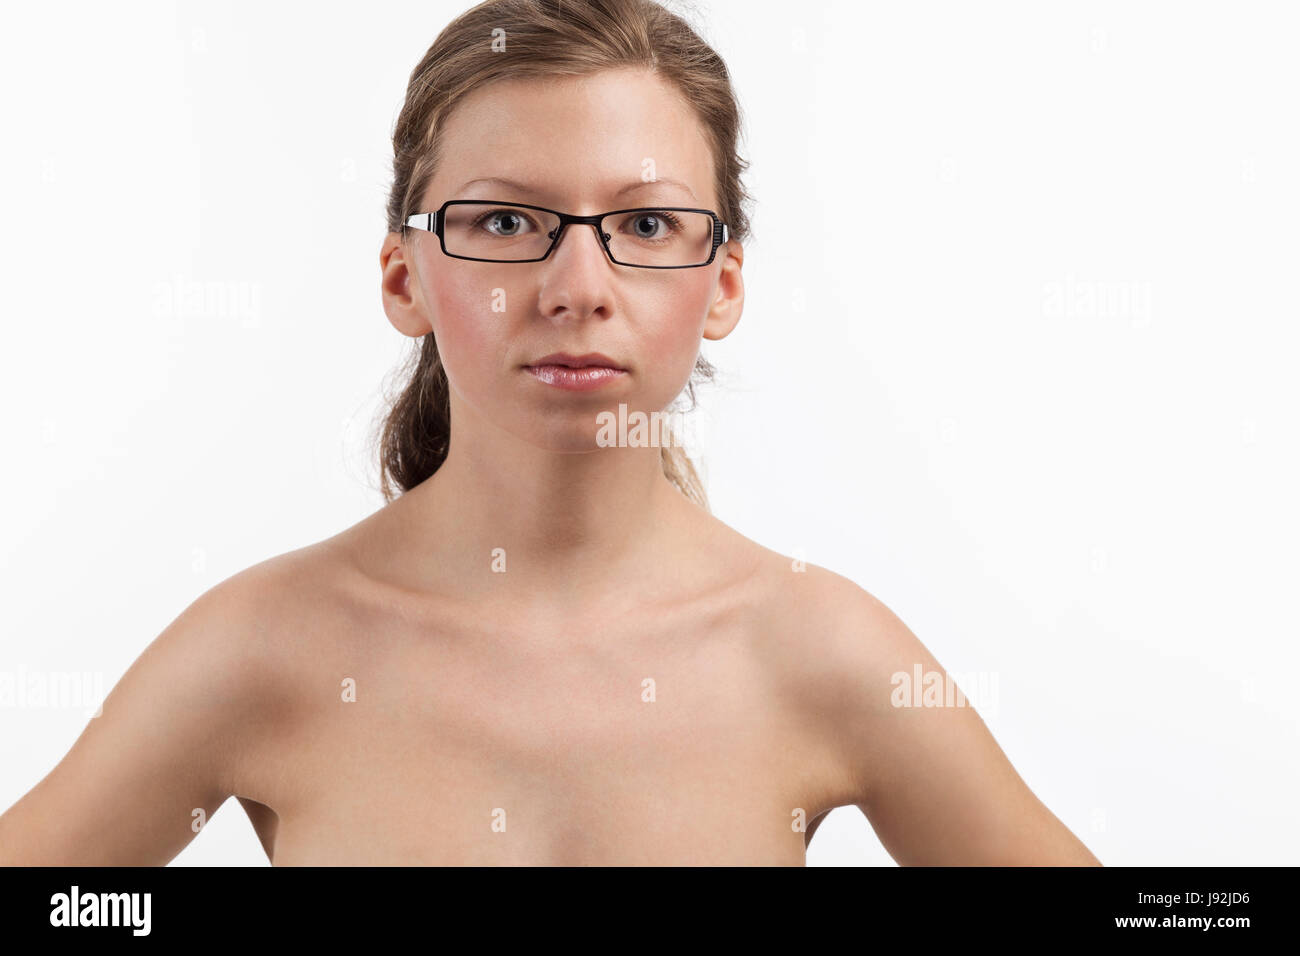 flawless skin of a pretty young woman Stock Photo